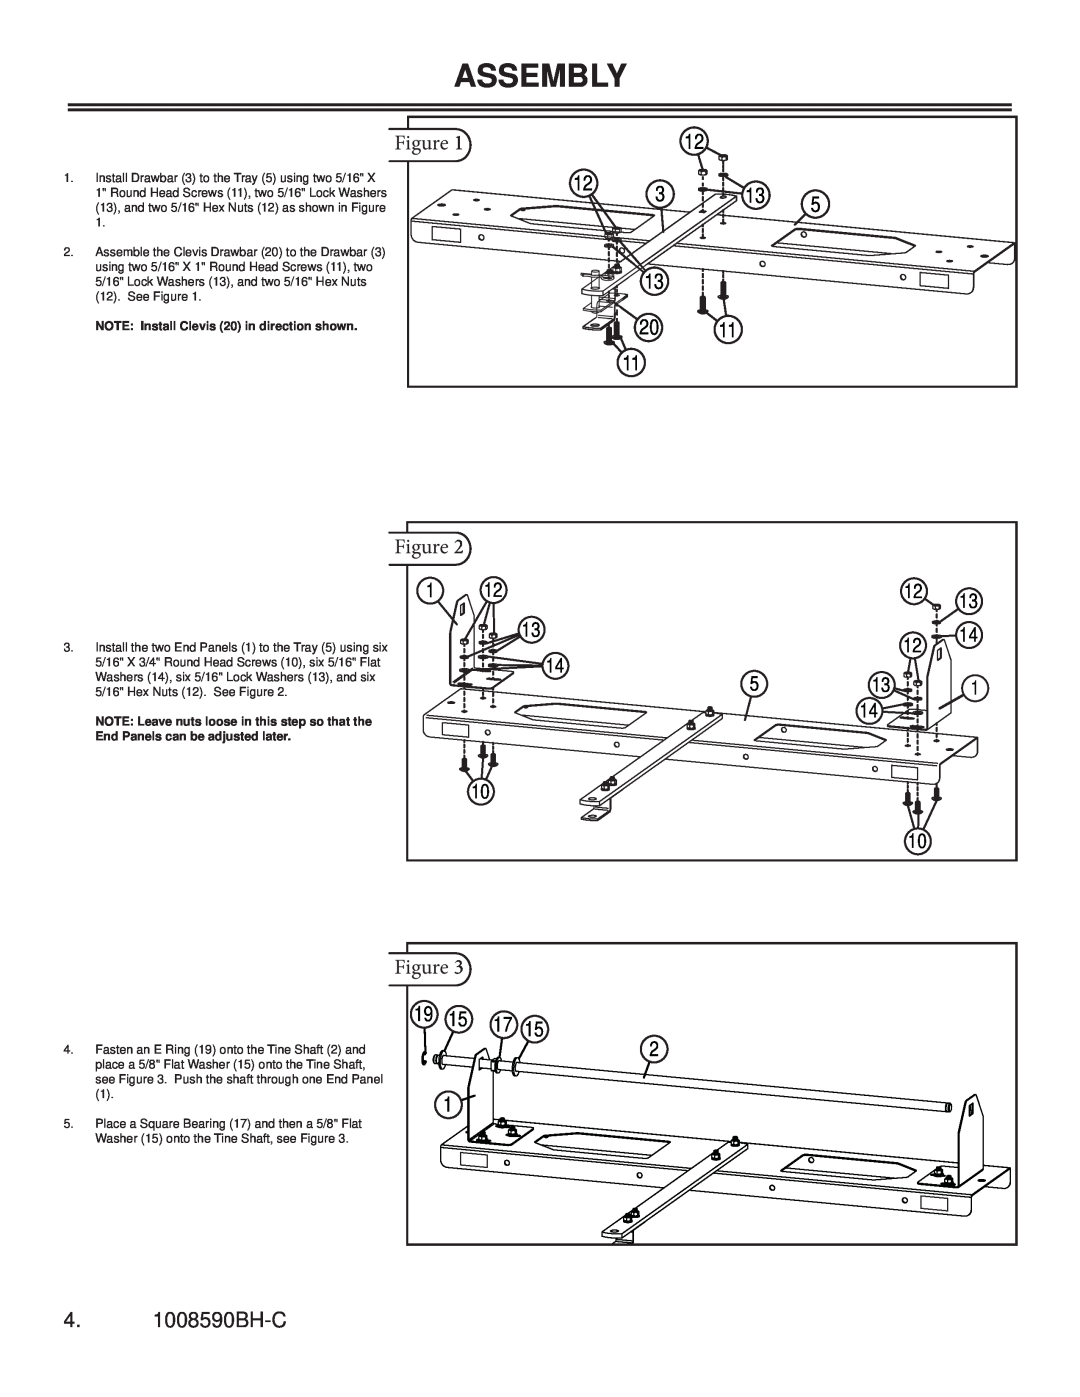 Sears S A - 4 0 0 B H owner manual Assembly, 4. 1008590BH-C, NOTE Install Clevis 20 in direction shown 